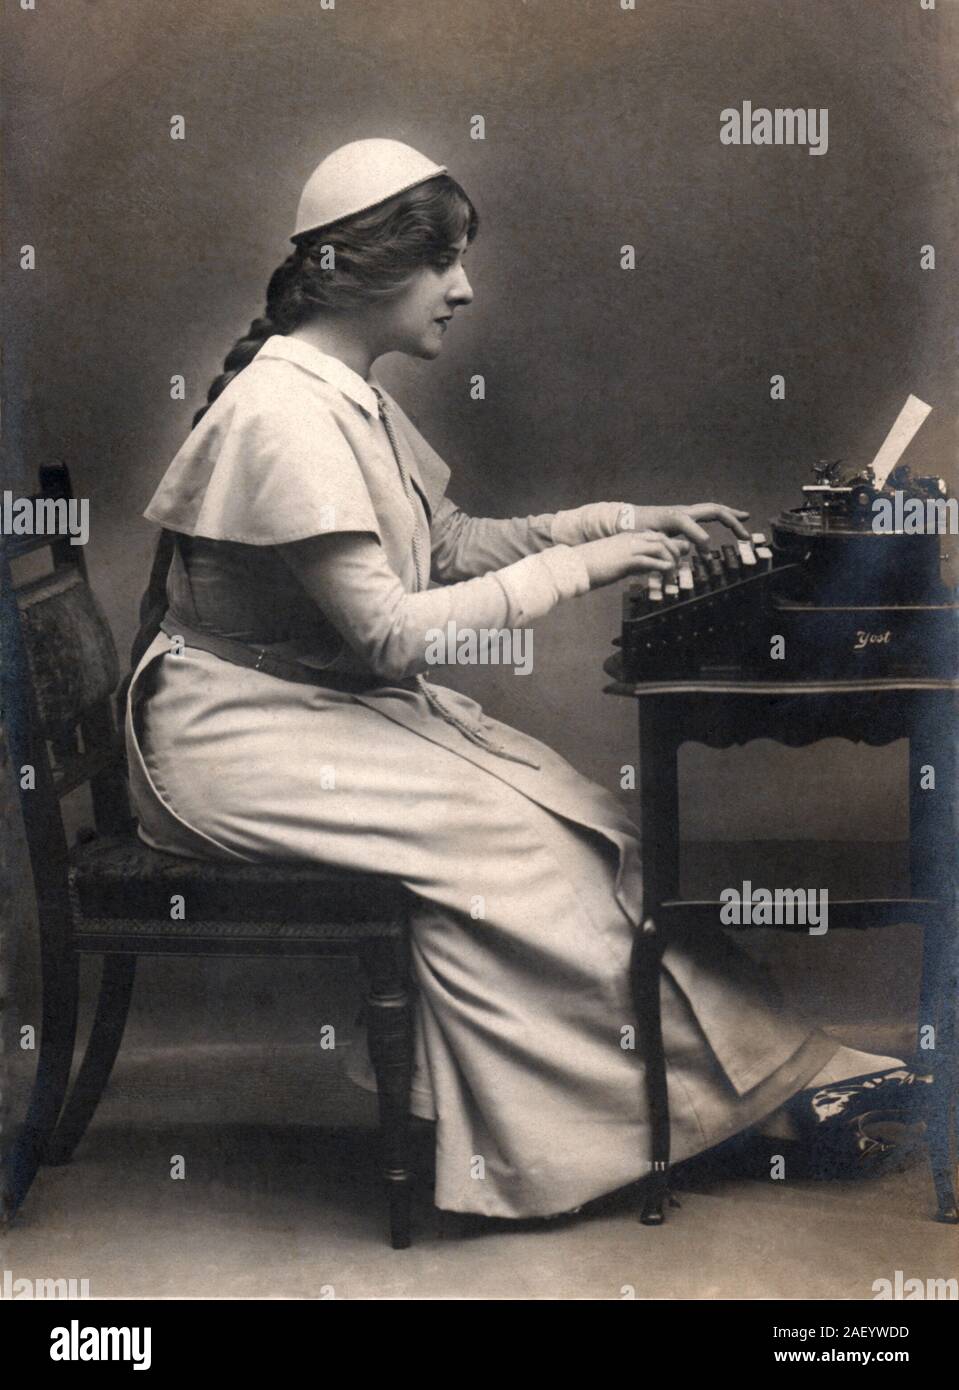 Secretary circa 1907 using a Yost typewriter from the late 1800s, vintage real photographic postcard (RPPC.) Stock Photo